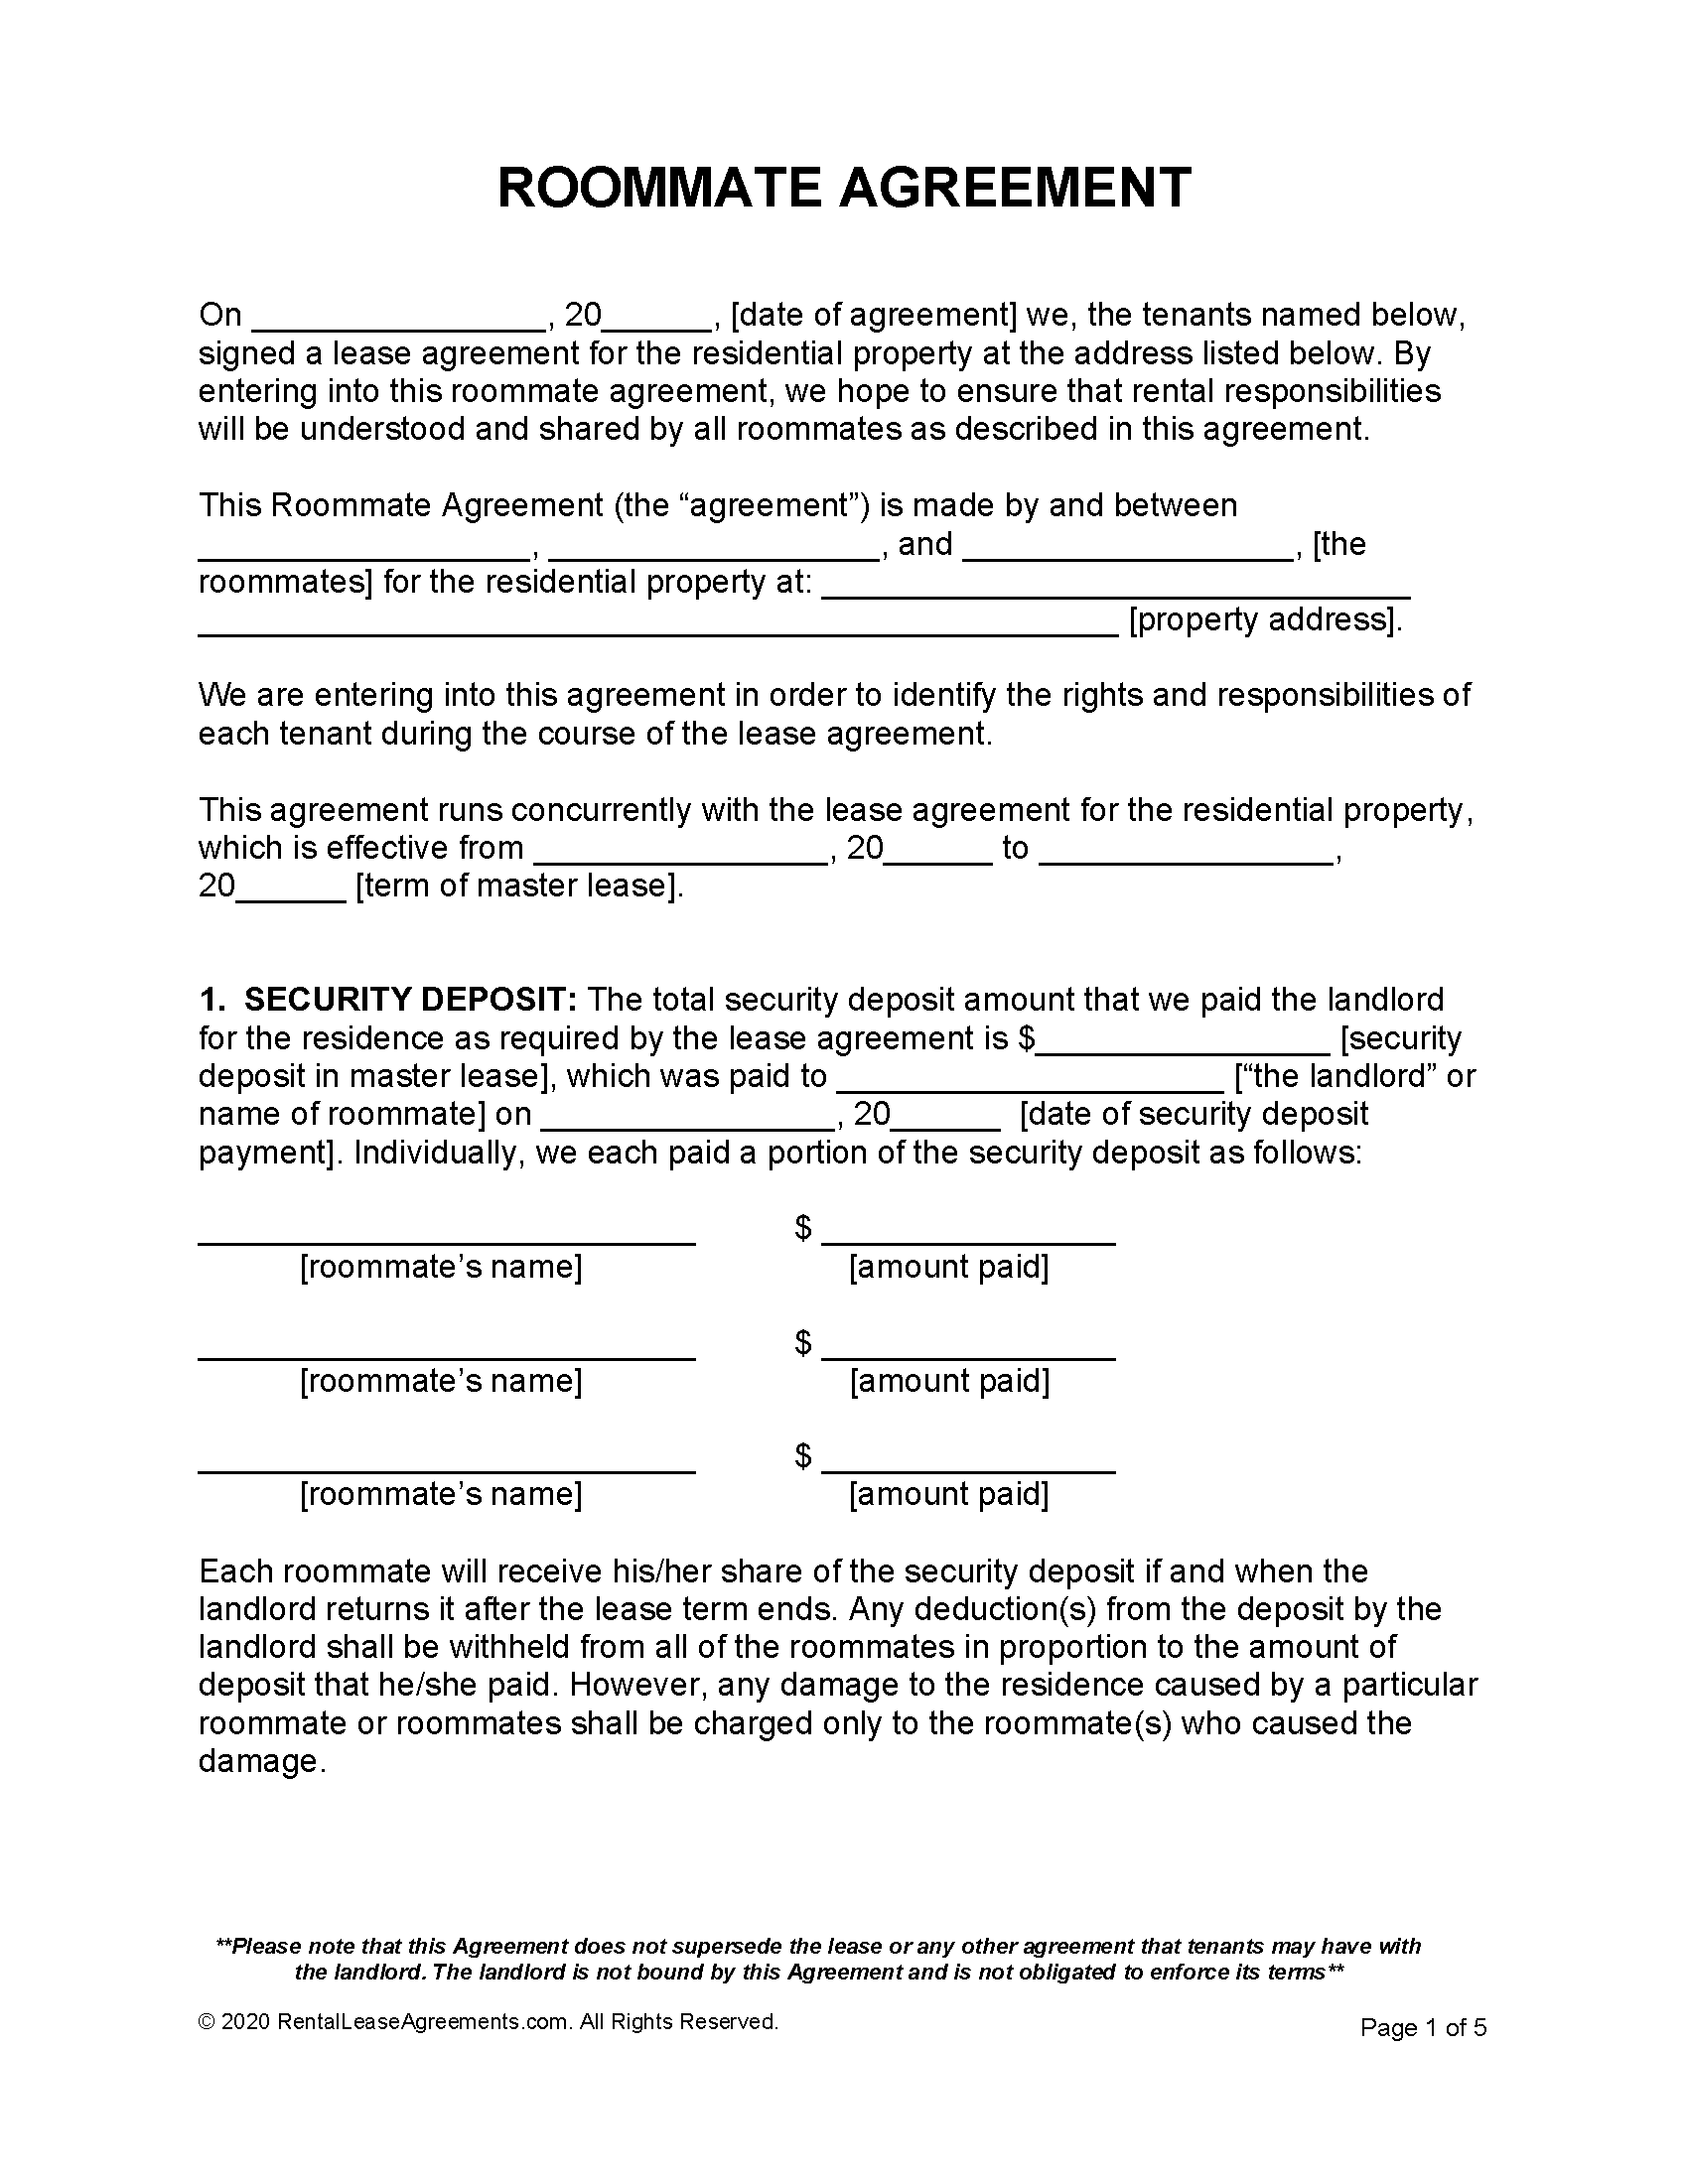 Free Roommate Agreement Template  PDF - Word In free roommate rental agreement template